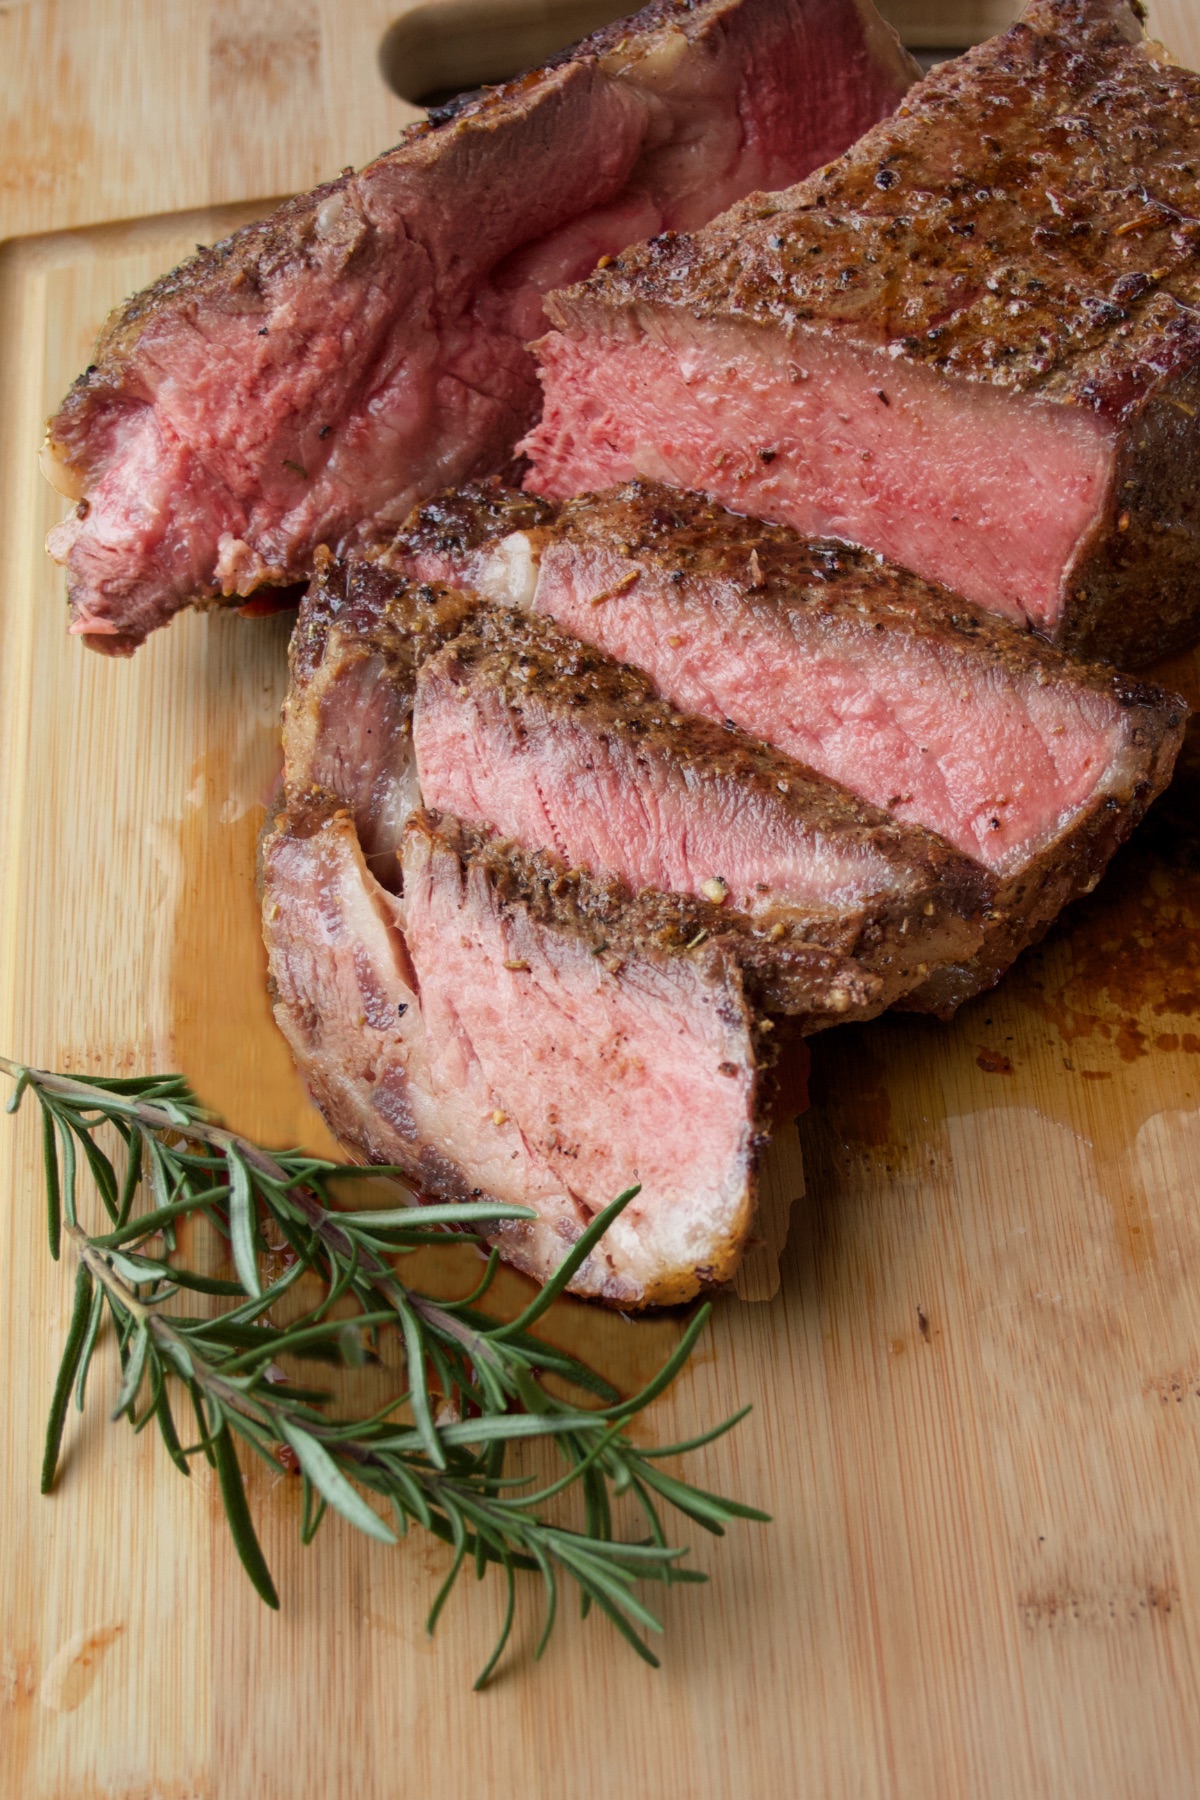 Reverse-Seared Ribeye Steak, freshly sliced on a cutting board with rosemary sprigs nearby.